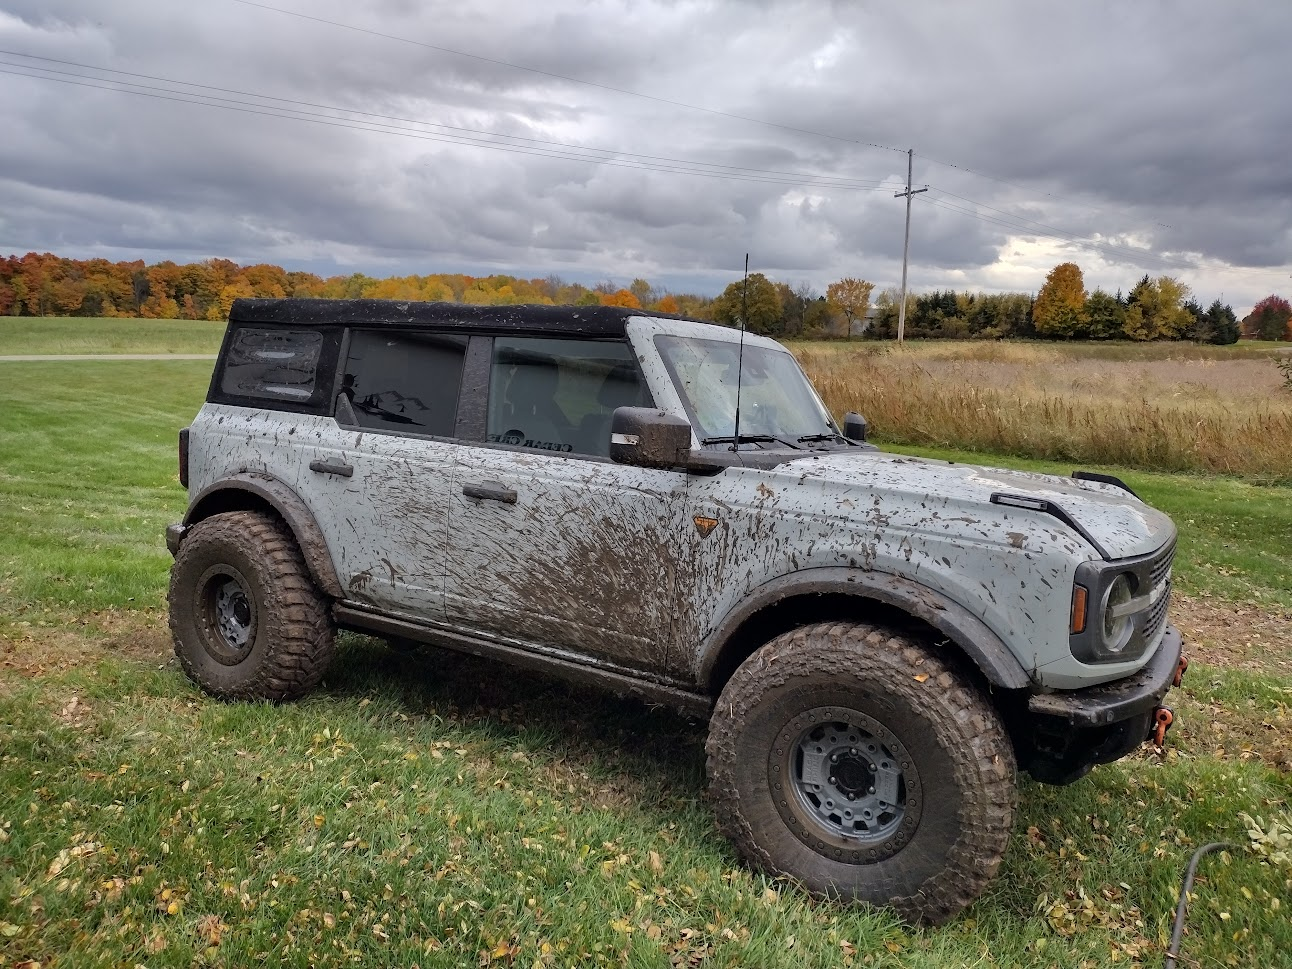 Ford Bronco 37" Tires on a Non-Sasquatch Badlands - My Experience, Results, Pics 1666321310335